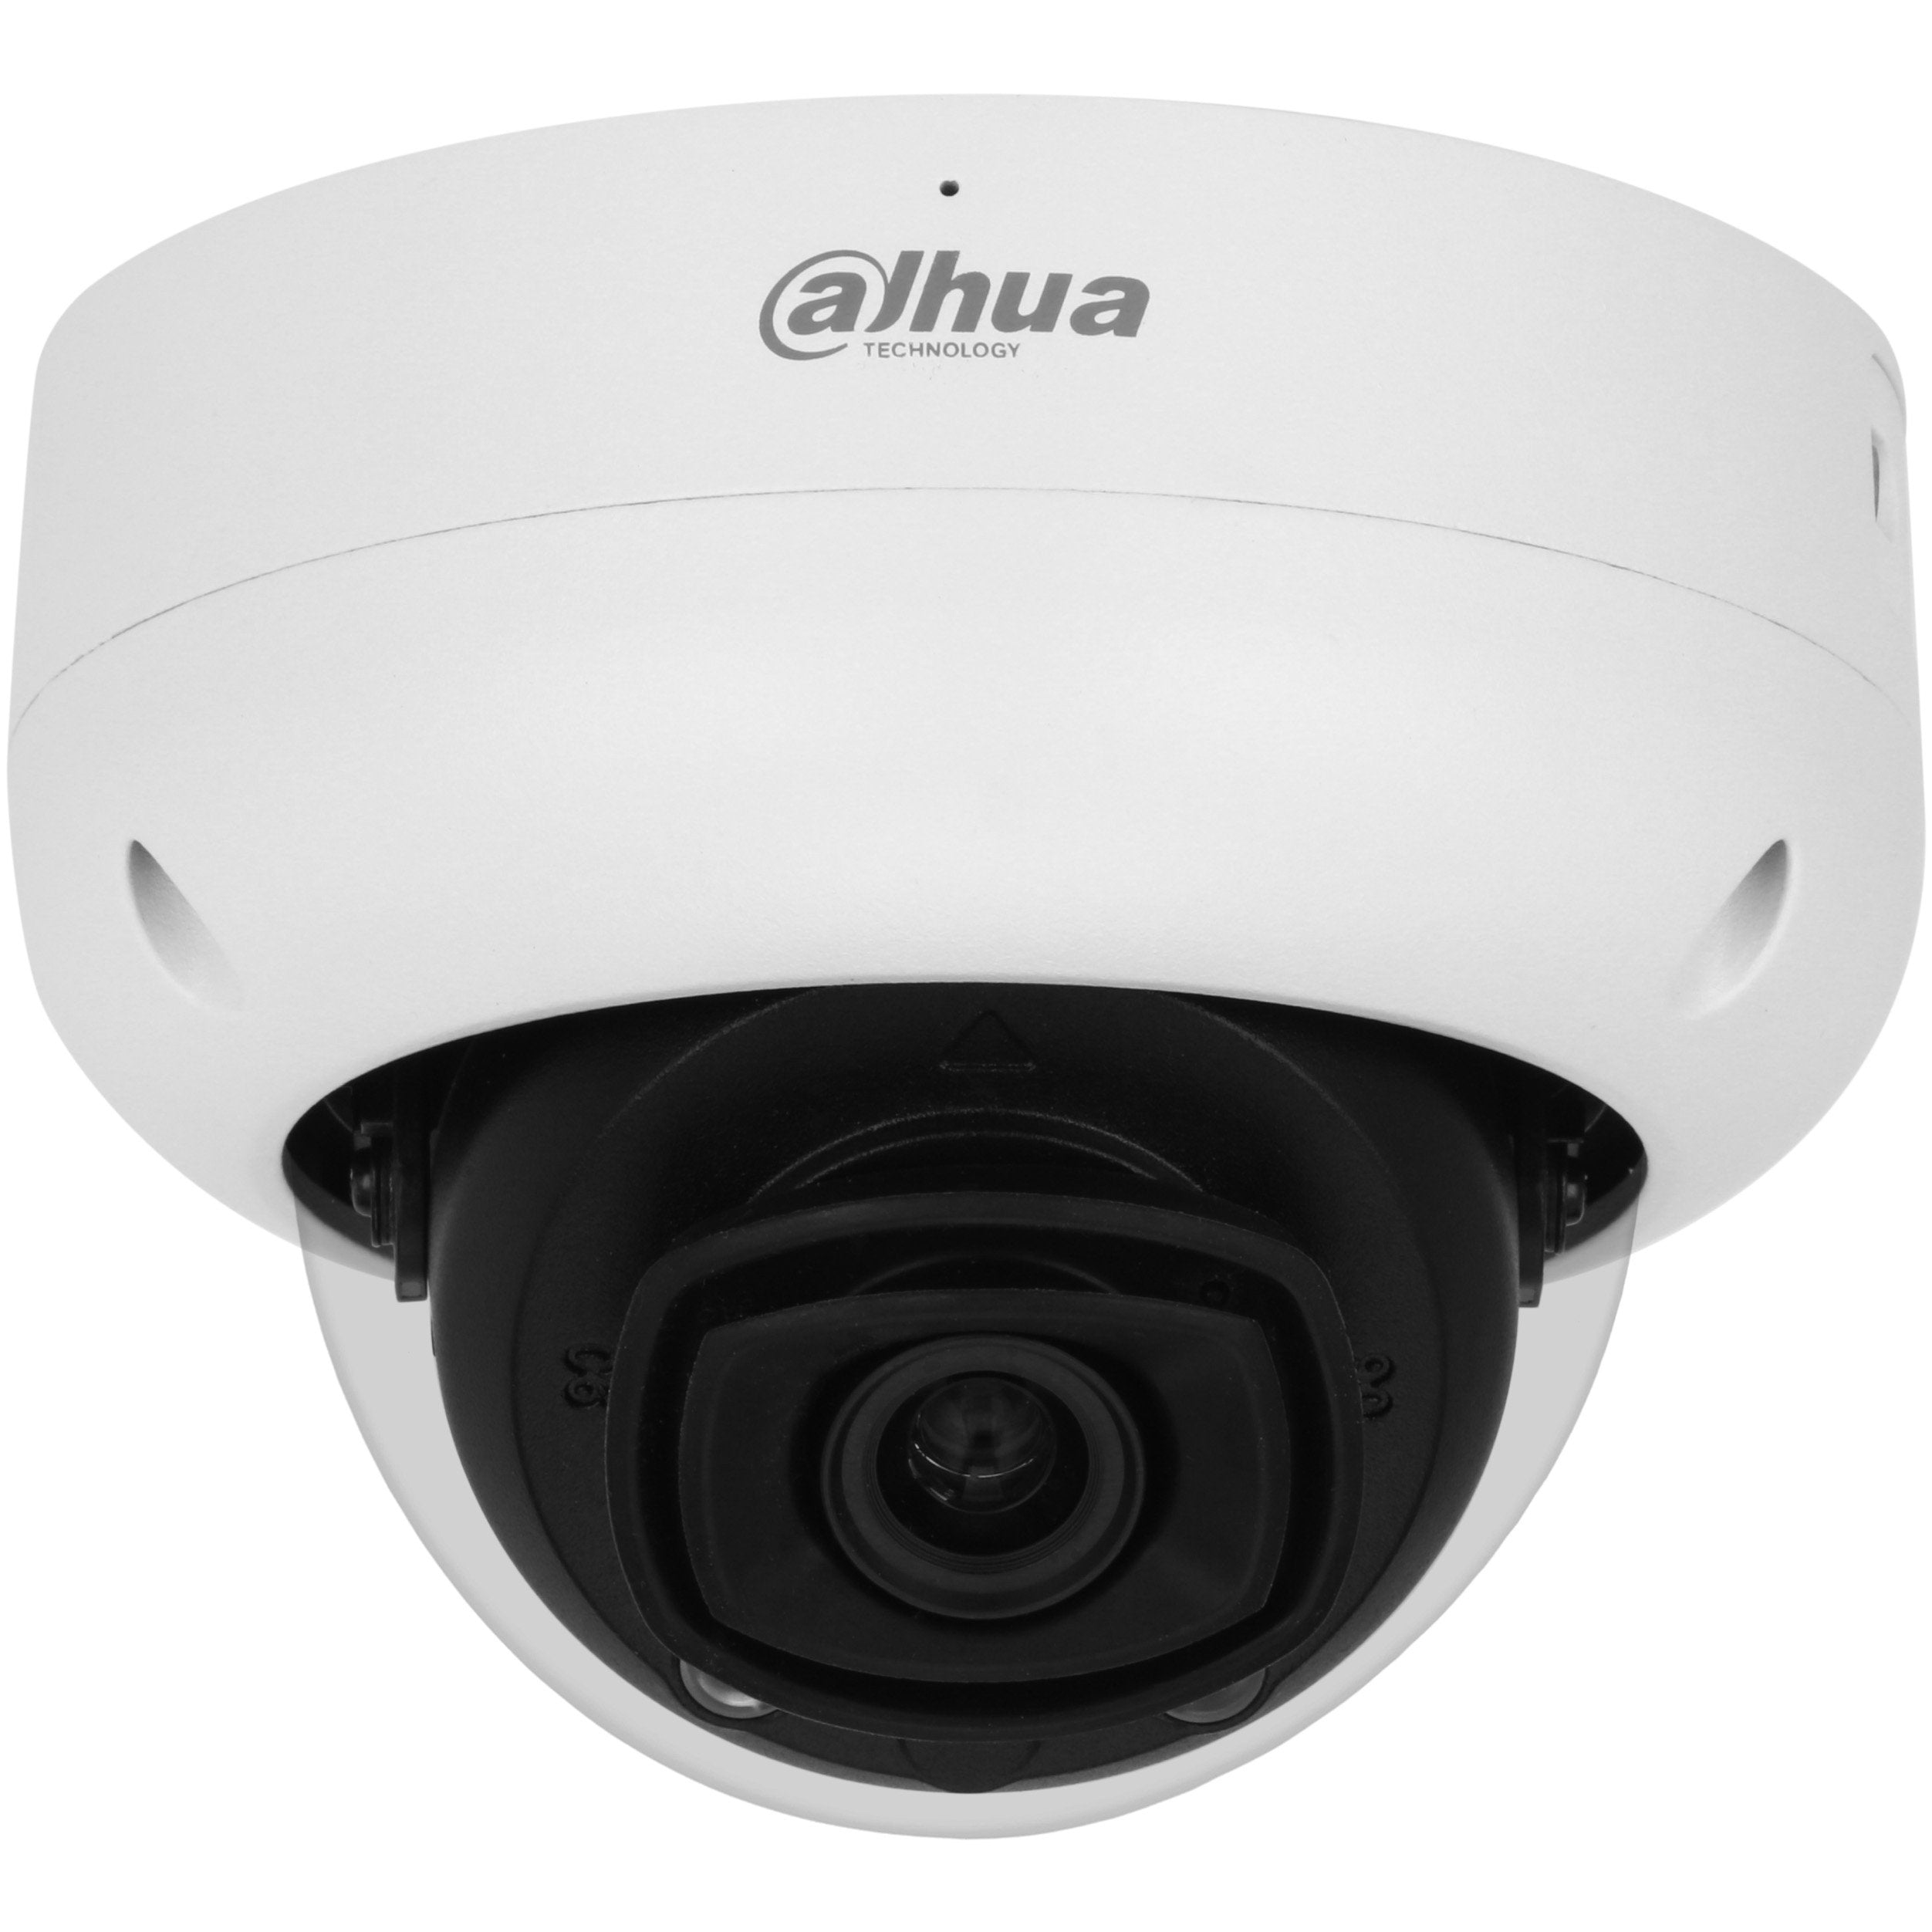 Dahua 5MP IP WizMind S Series IR Vandal Dome Camera, SMD 3.0, Acupick, Face Detection, Face Attributes, People Counting, Perimeter, Starlight, 2.8mm, 120dB WDR, 50m IR, ePOE / 12VDC, IP67, IK10, MicroSD, Built-in Mic (Junction Box: PFA137)